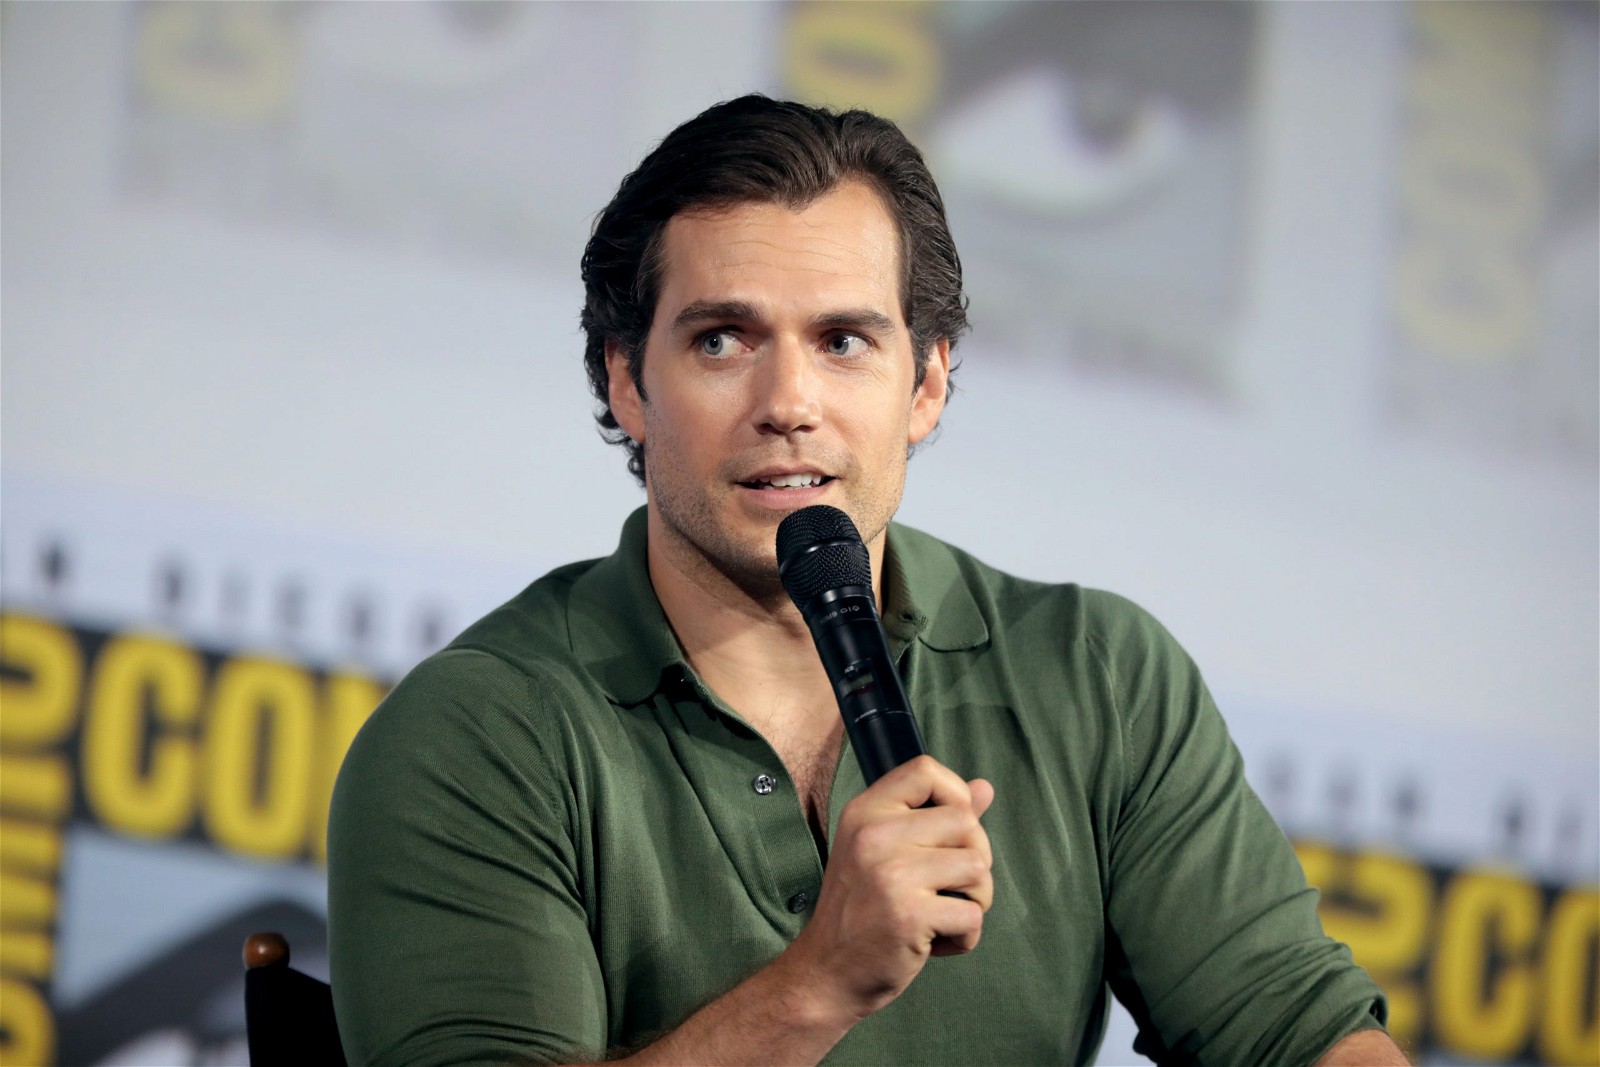 The Henry Cavill Rumor and Fan Discussions